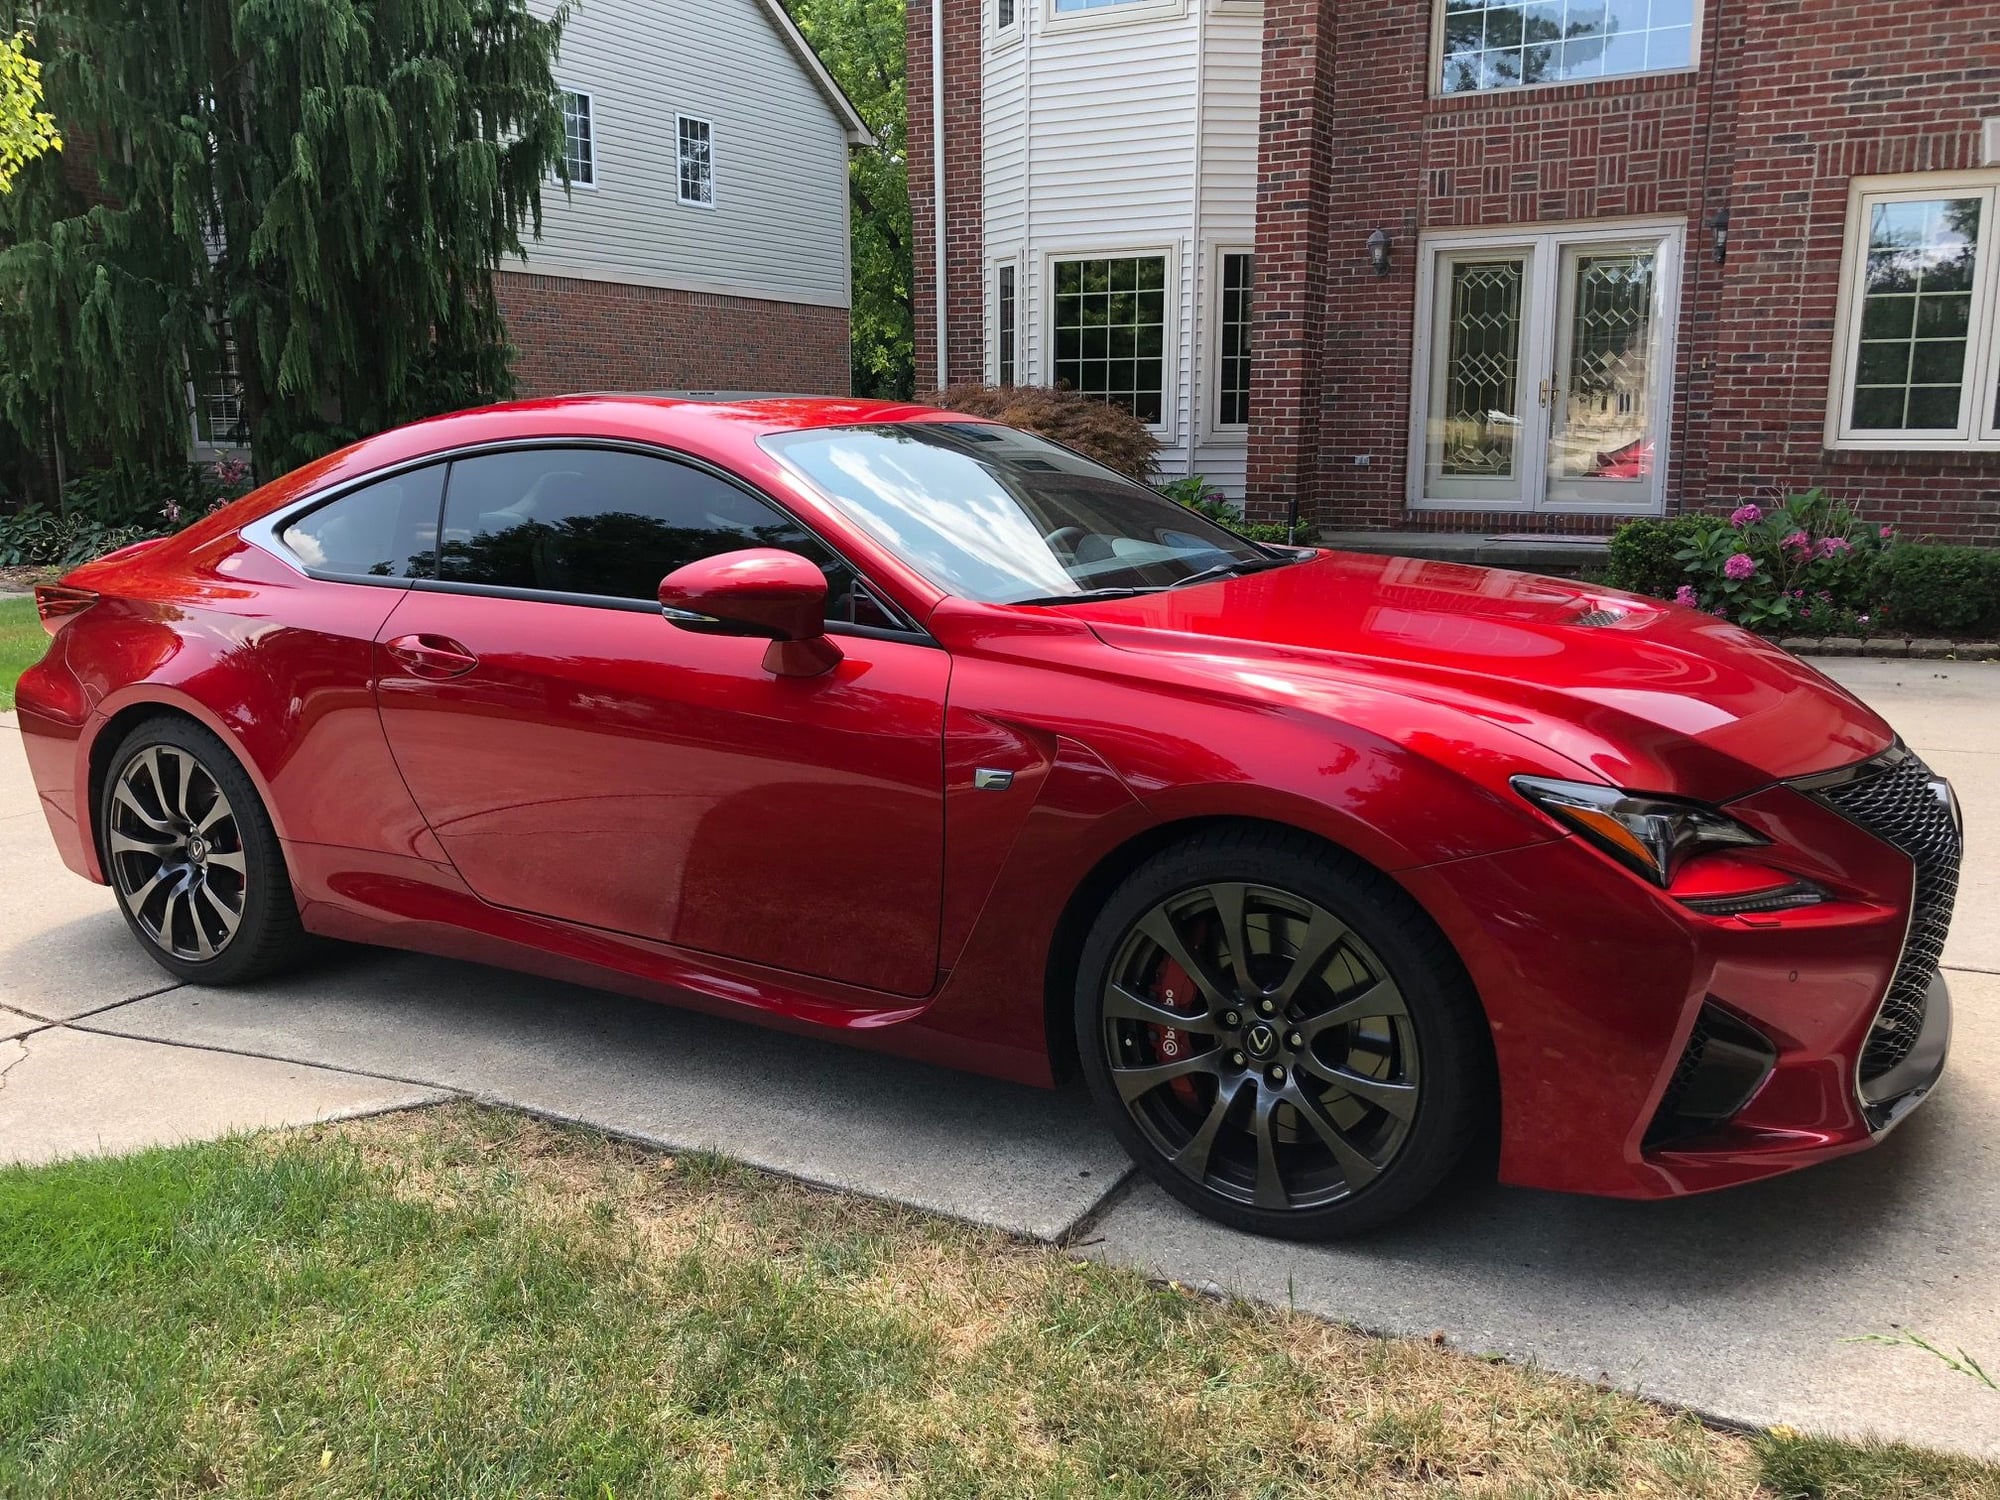 2015 Lexus RC F - 2015 Lexus RCF - Used - VIN JTHHP5BC6F5000789 - 11,700 Miles - 8 cyl - 2WD - Automatic - Coupe - Red - Troy, MI 48085, United States